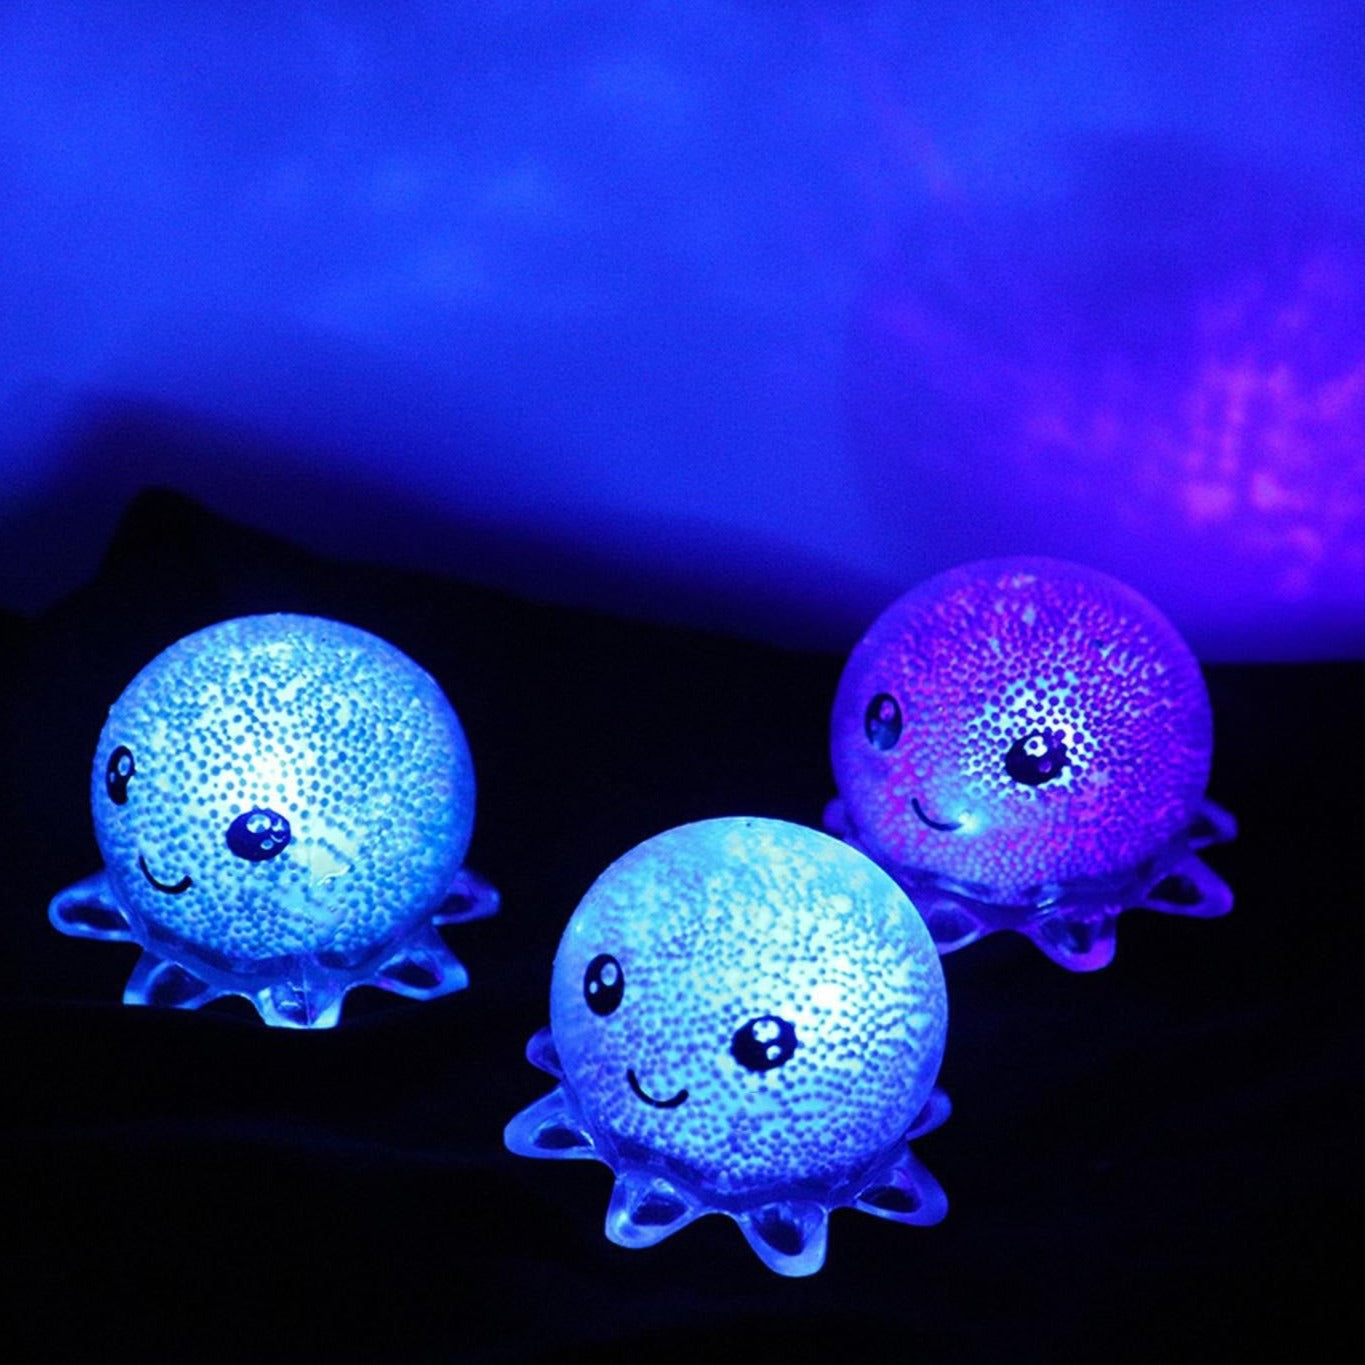 Light-Up Octopus, This Light-Up Octopus is made from soft wiggly rubber surrounded by asquishy air-filled interior. The Light-Up Octopus is made of a squishy air-filled interior. As the Light-Up Octopus is squeezed the little plastic beads inside move about and make different patternsPerfect for sensory play, stress relief or as a decorative item for your child's room, the Light-Up Octopus is an entertaining and captivating toy that will bring hours of fun for children of all ages. This Light-Up Octopus is 